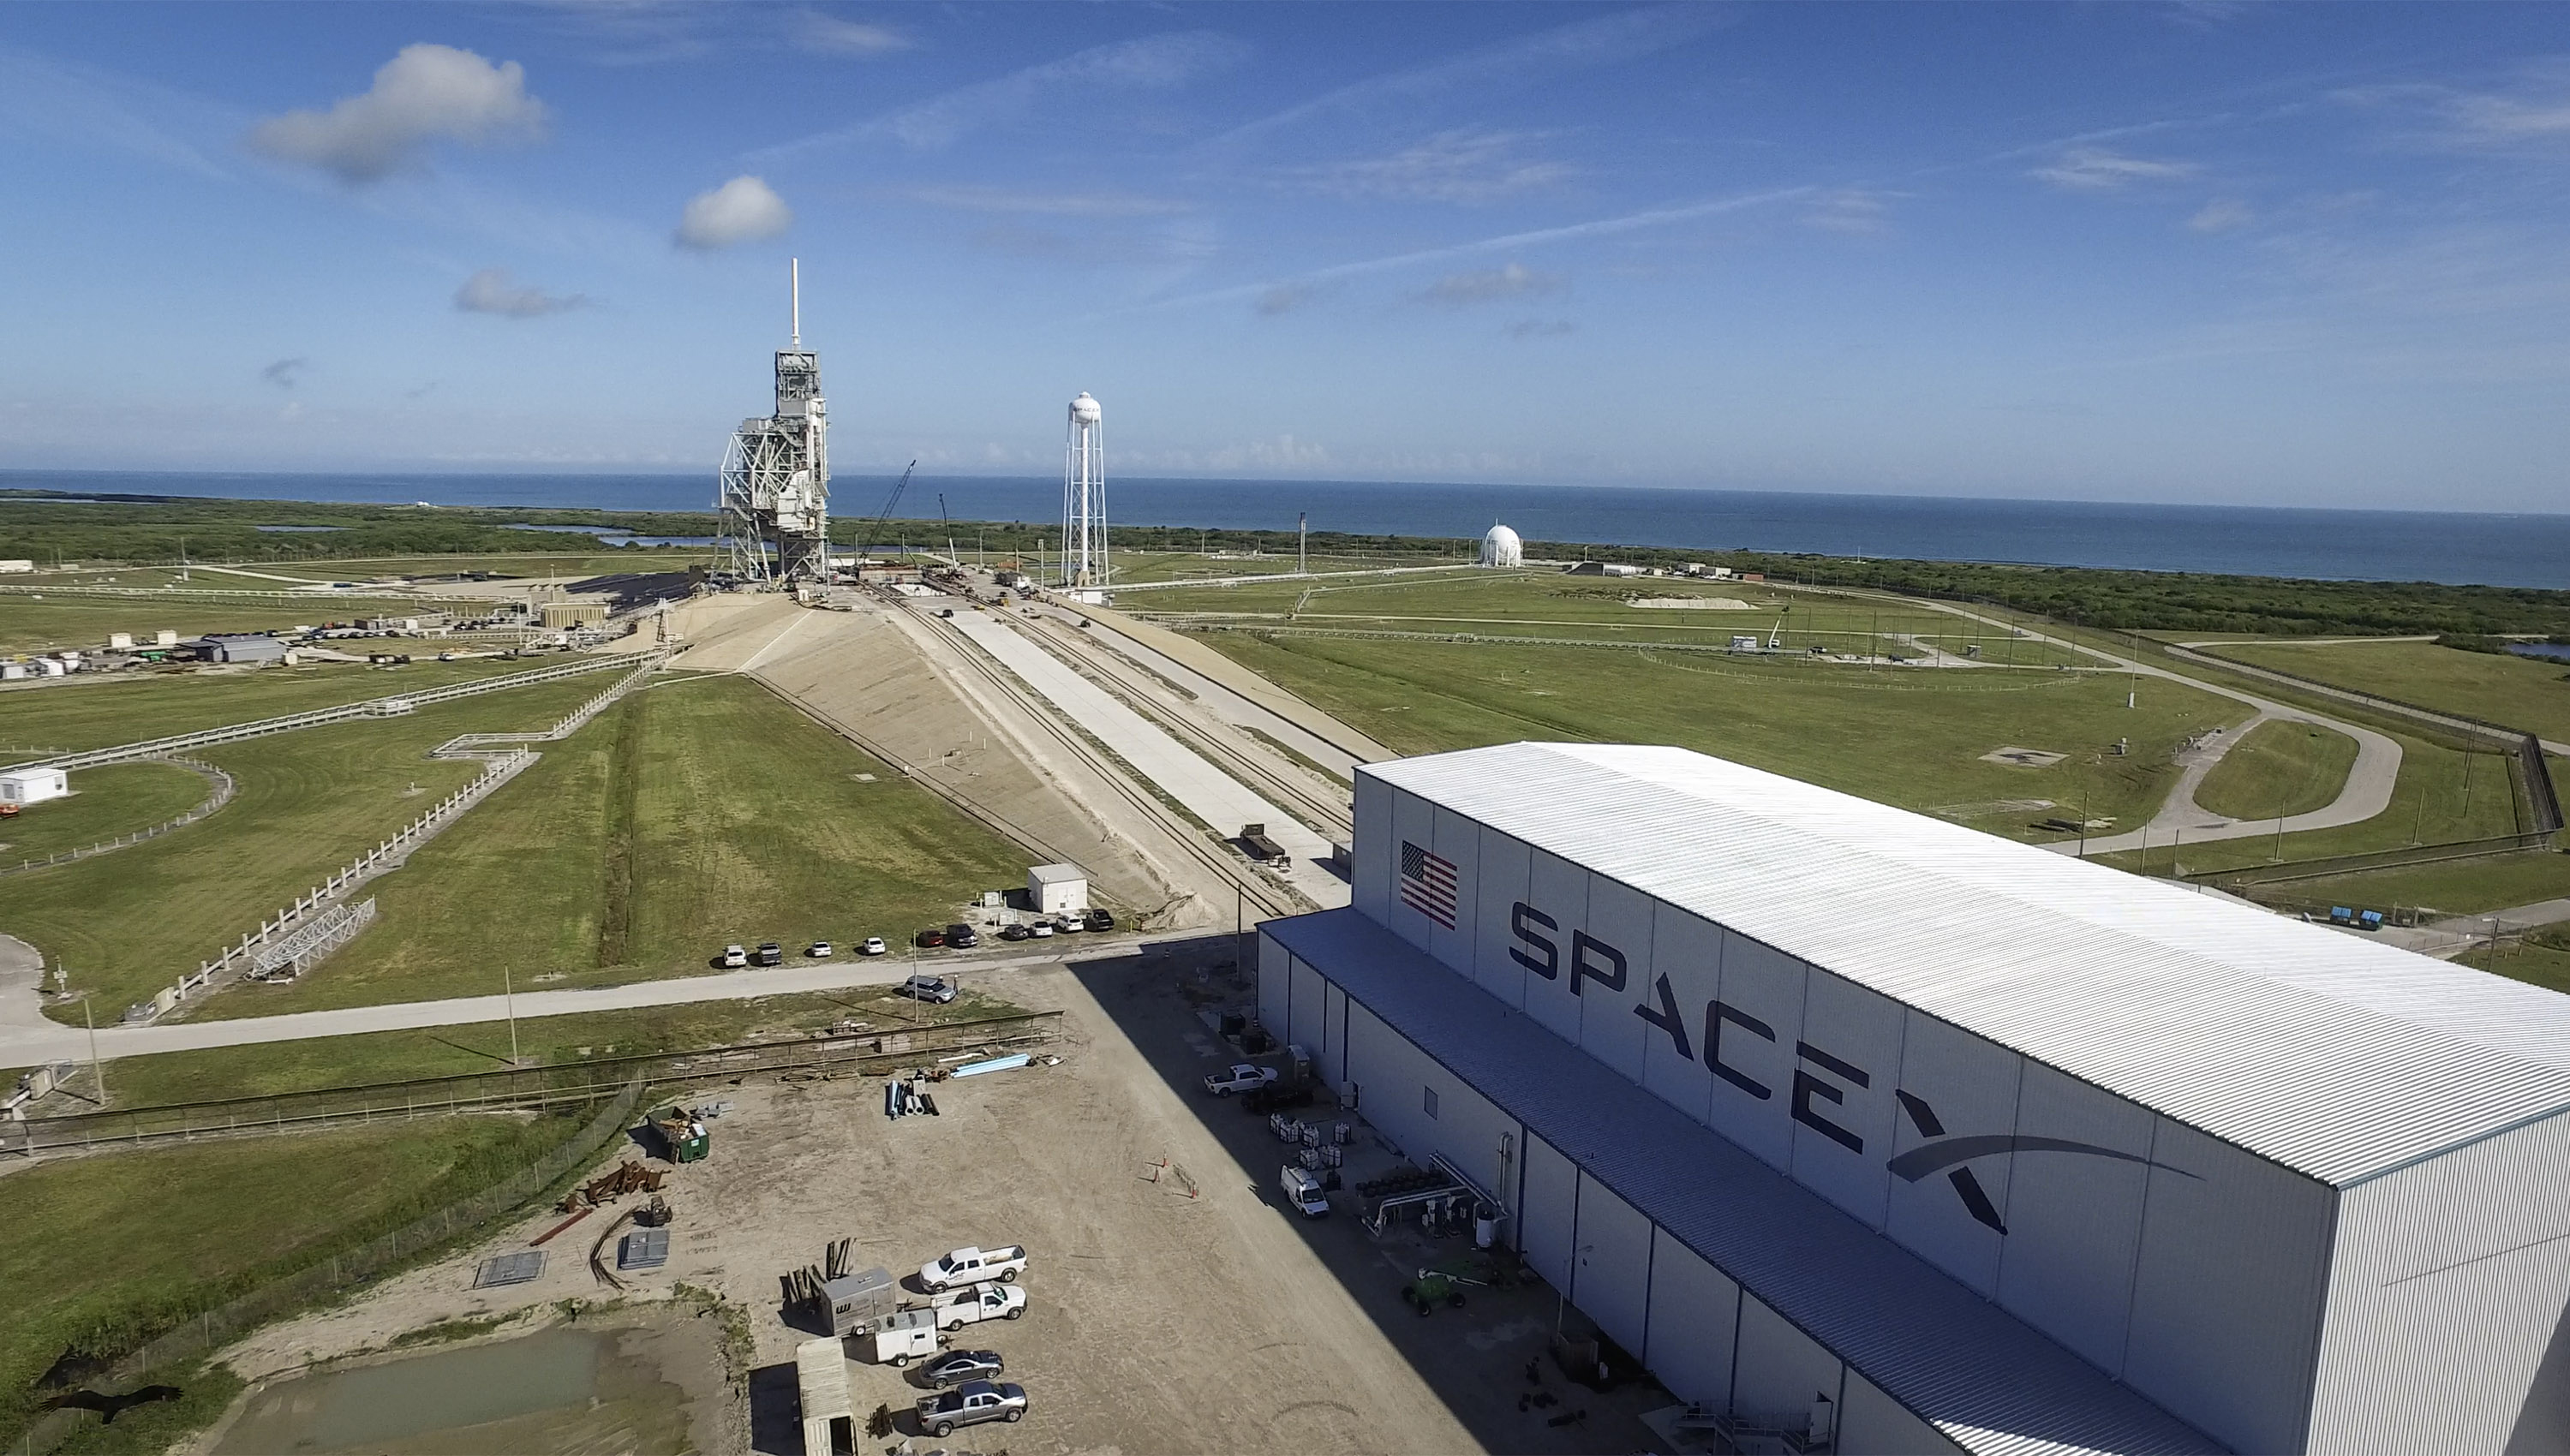 Watch Live @ 3 pm ET! NASA Pad 39A Briefing for SpaceX-10 Launch